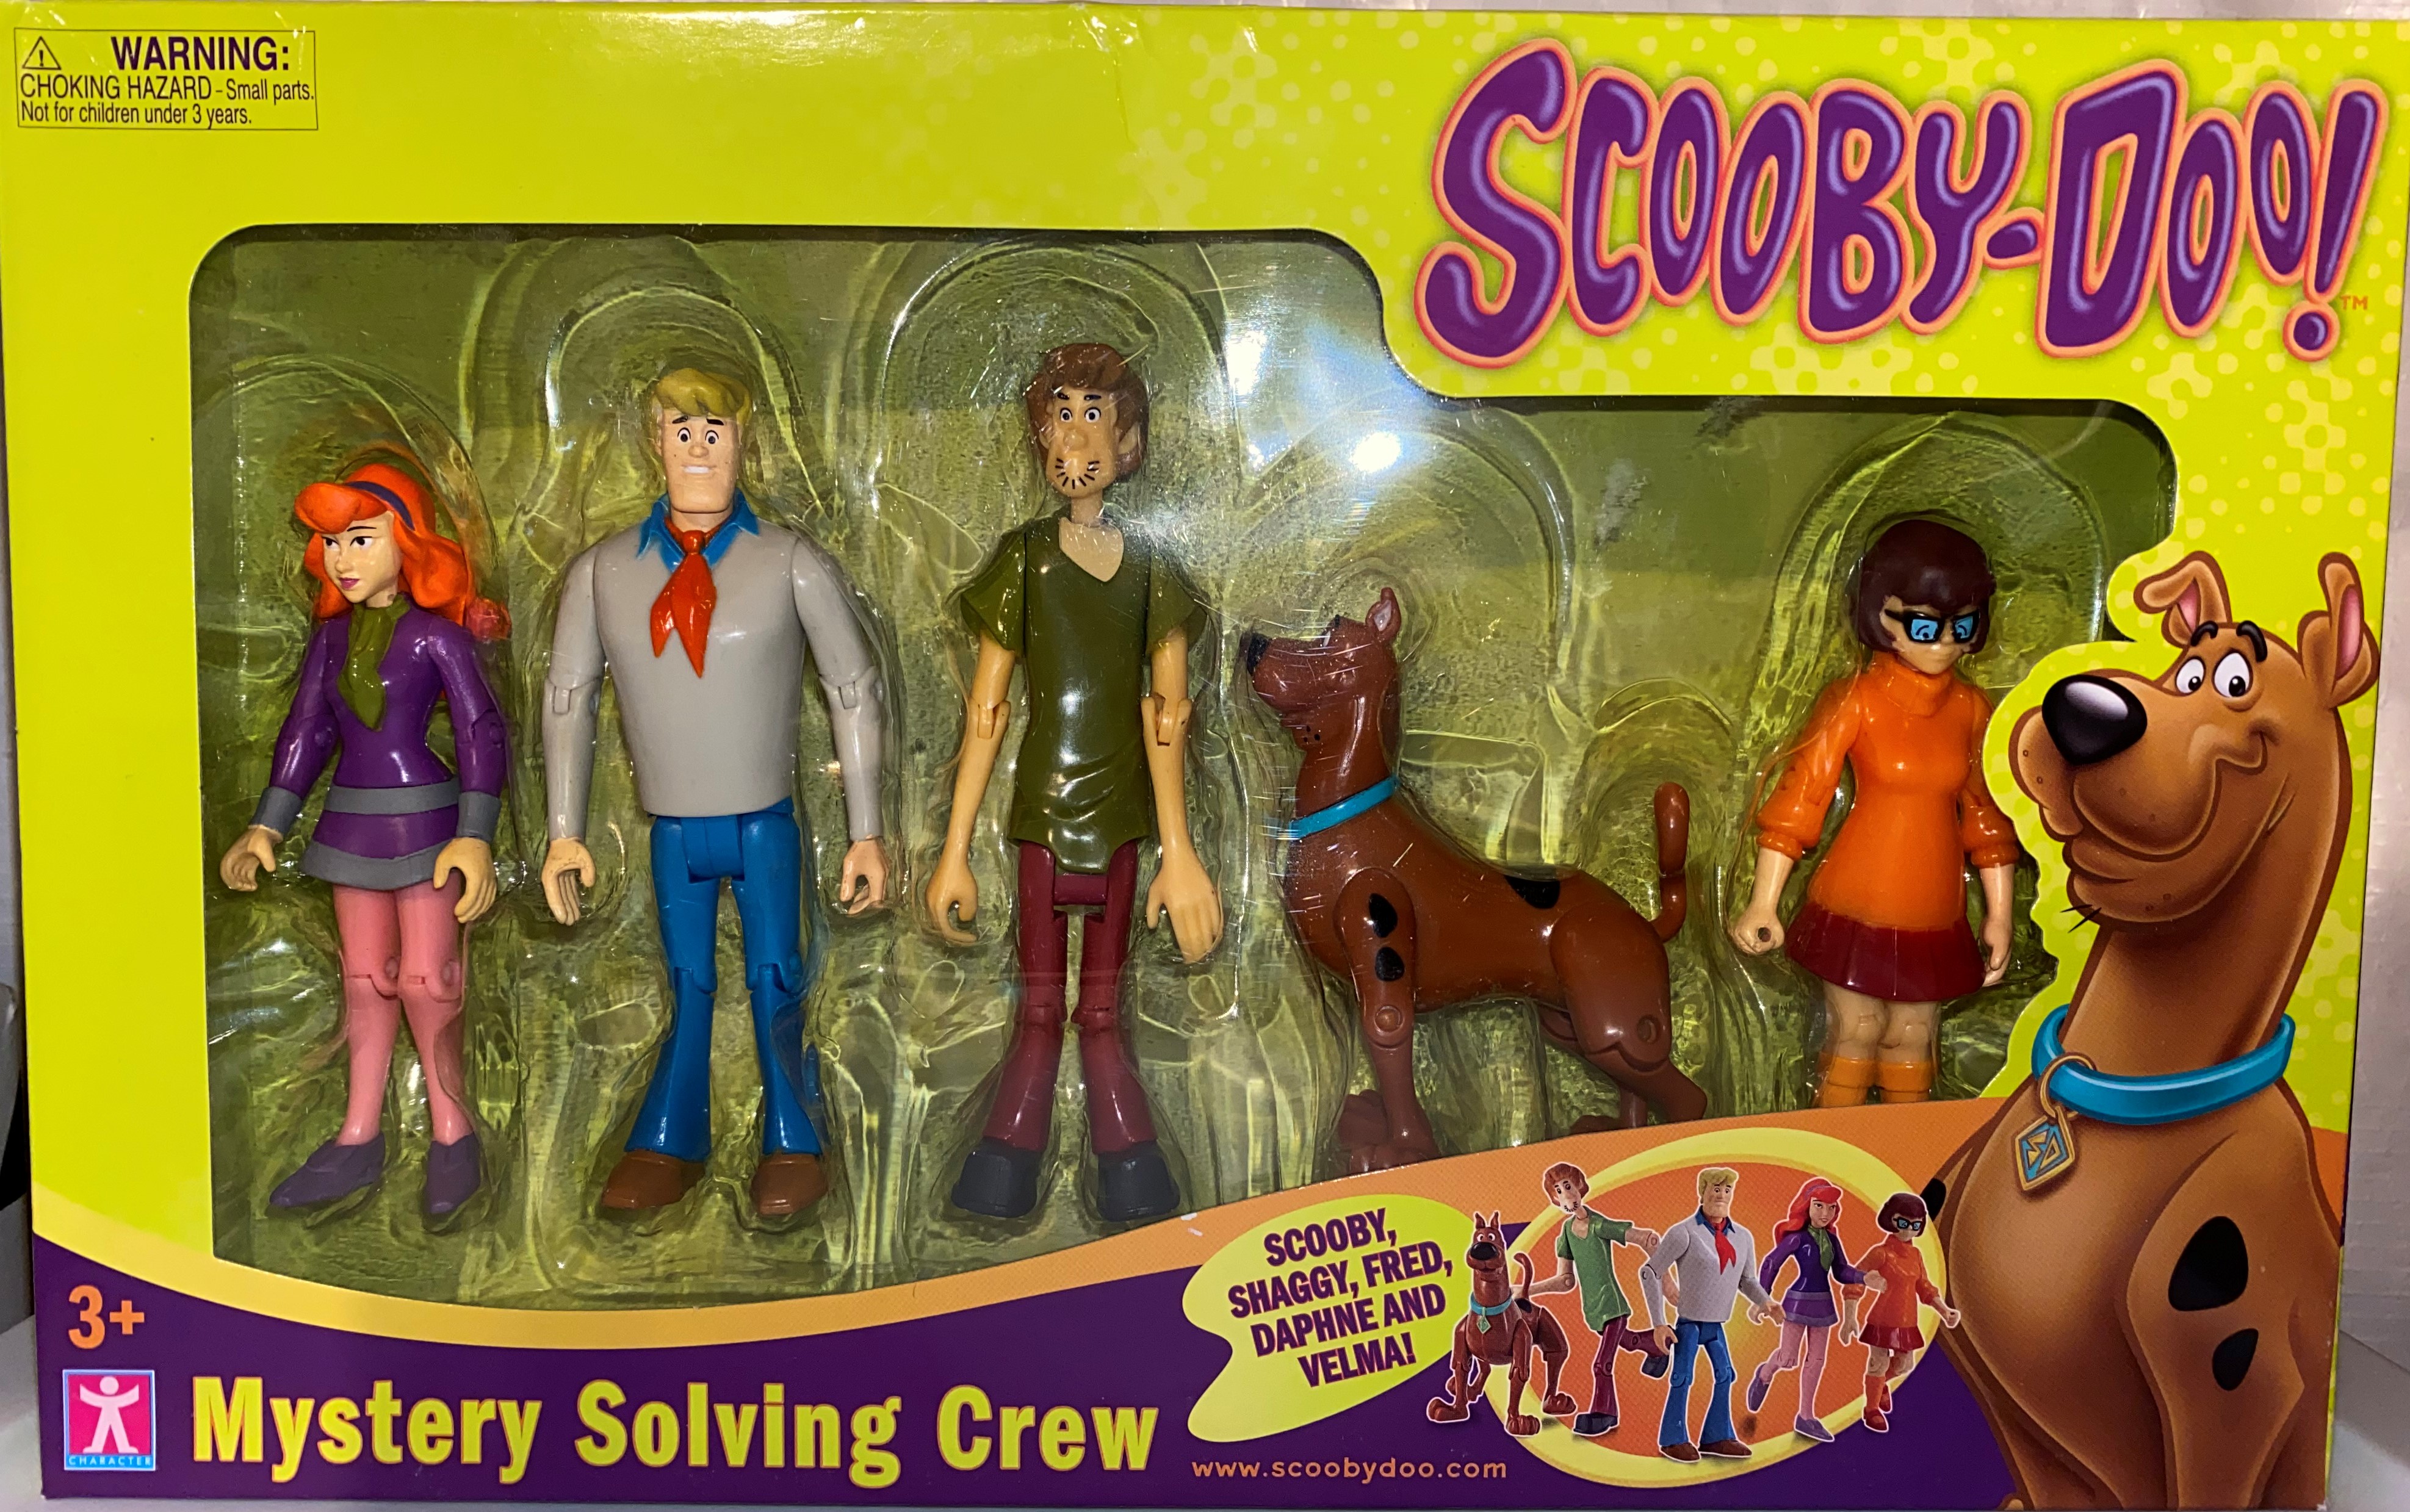 Scooby Doo Mystery Solving Crew Action Figure Set for sale online 